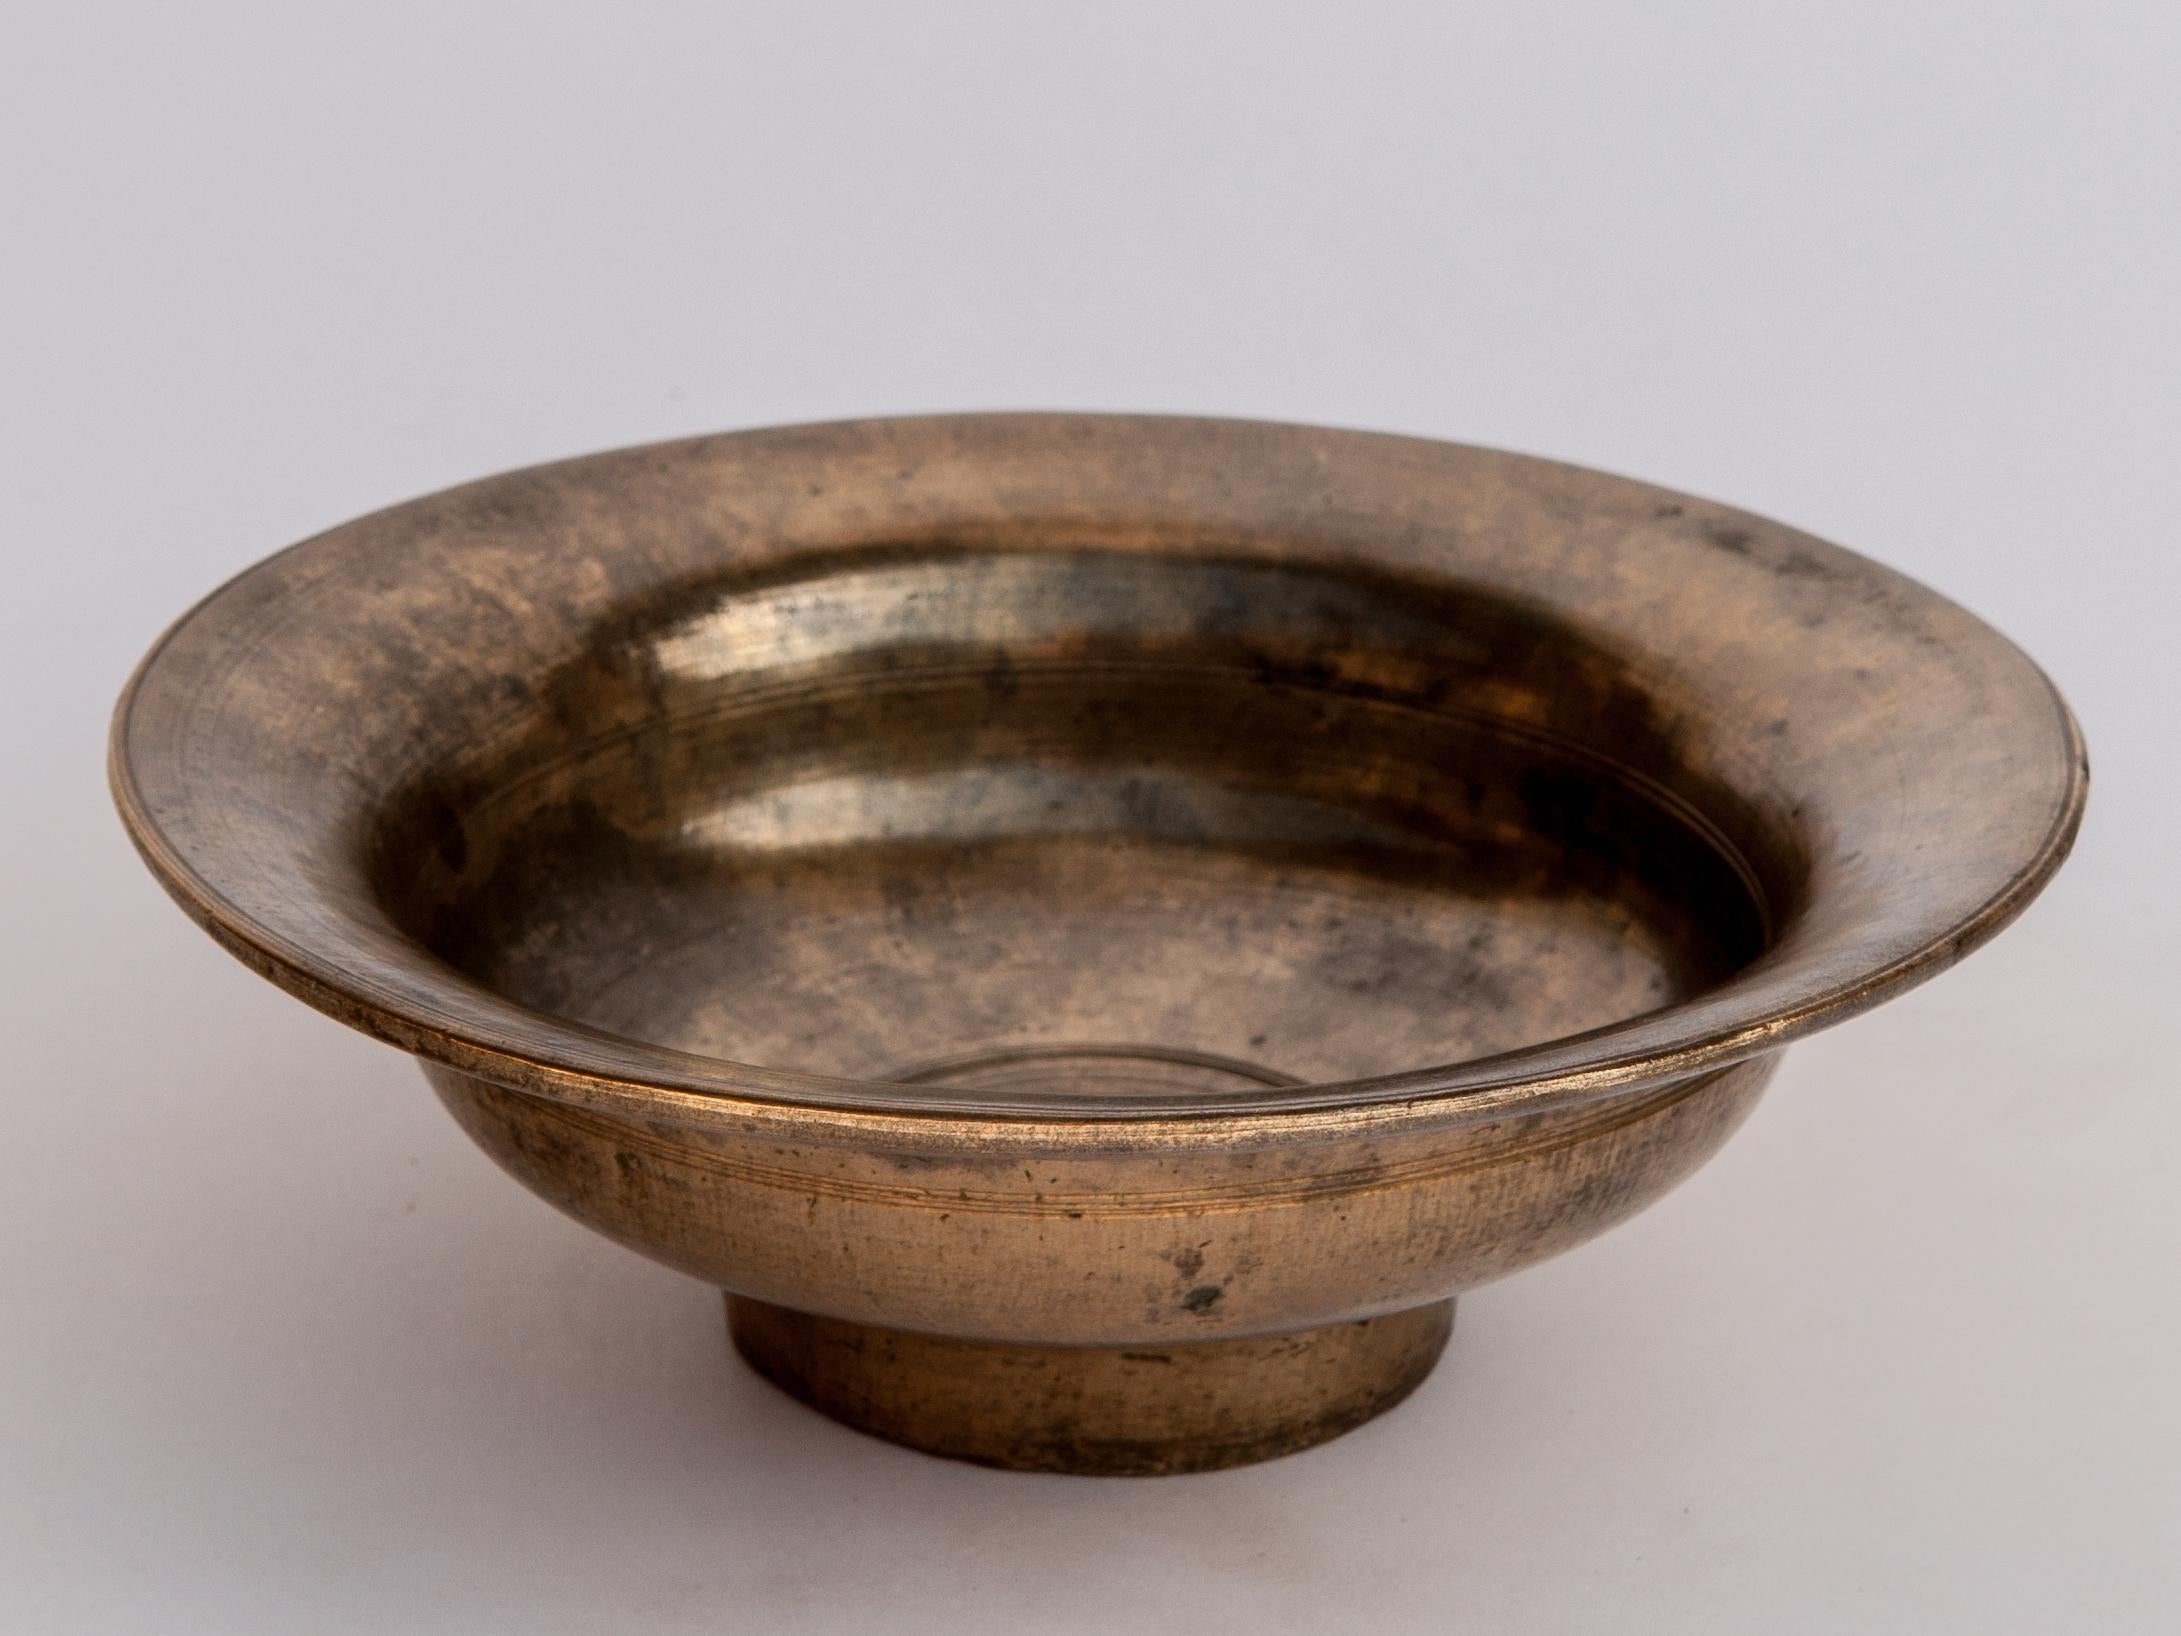 Vintage Tibetan / Nepali Tsampa bowl, bronze. From Nepal, Mid-20th century.
This bowl comes from the highlands of Nepal, along the Tibetan Nepal border where it would have been used as a food bowl for tsampa, a roasted barley flour. This particular